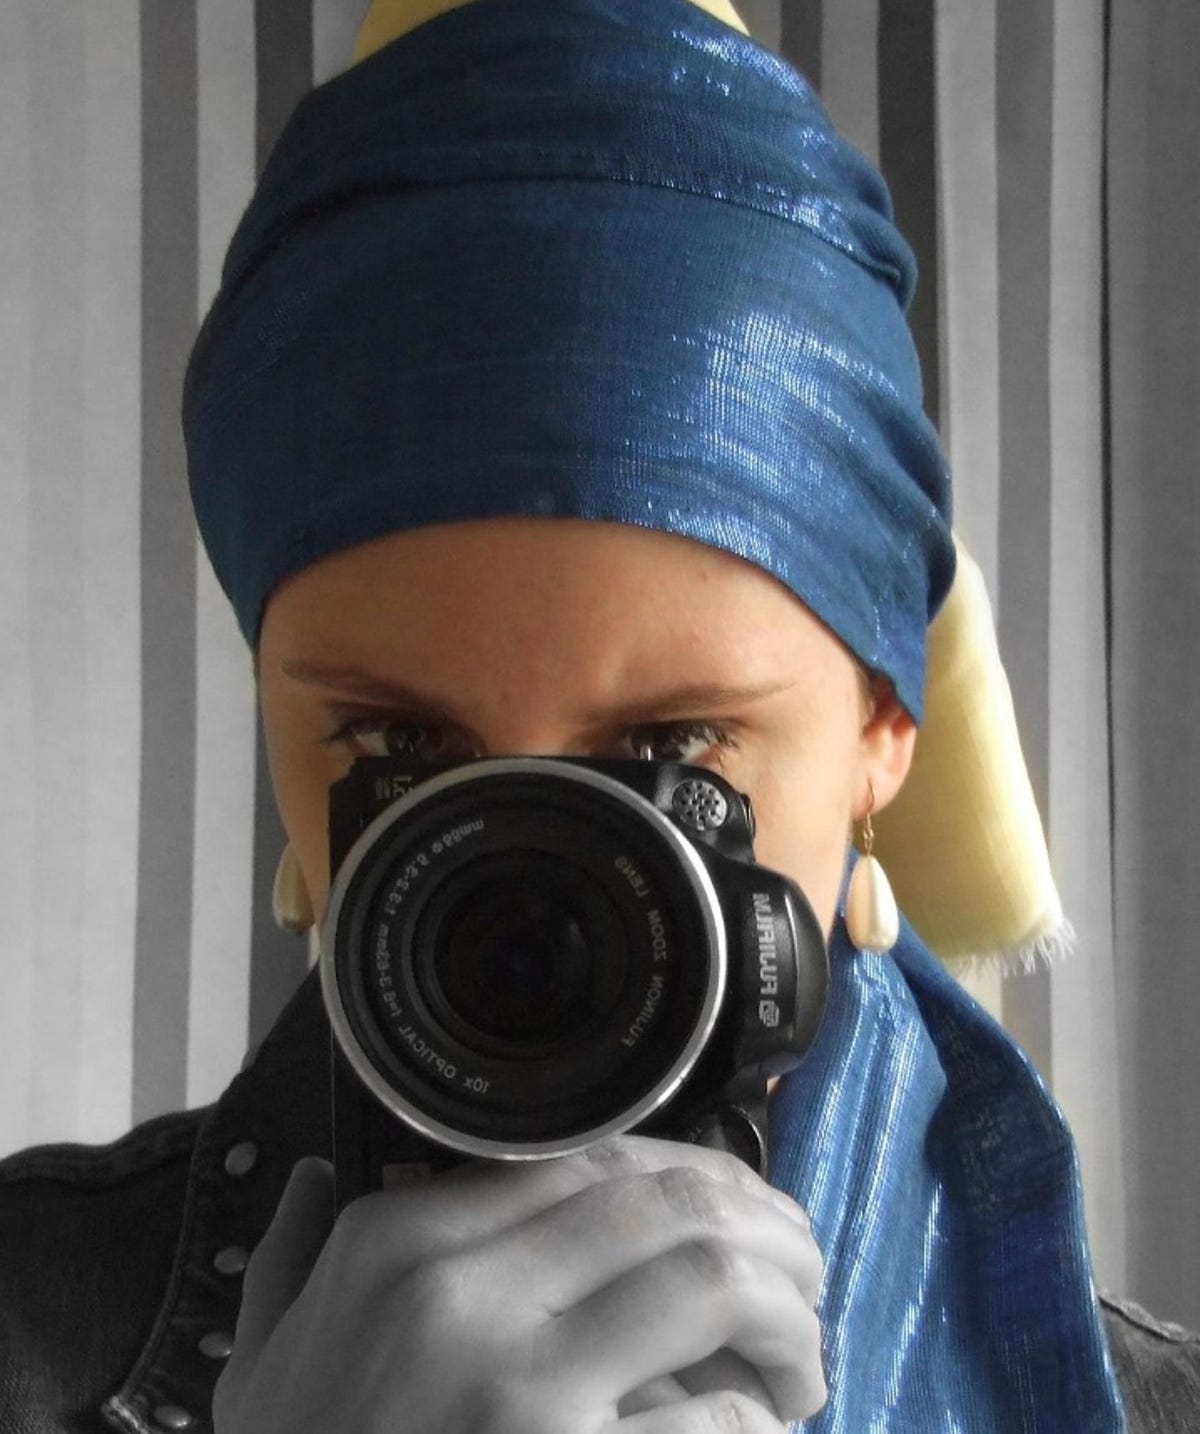 Woman wears a turban and two pearl earrings while holding a camera